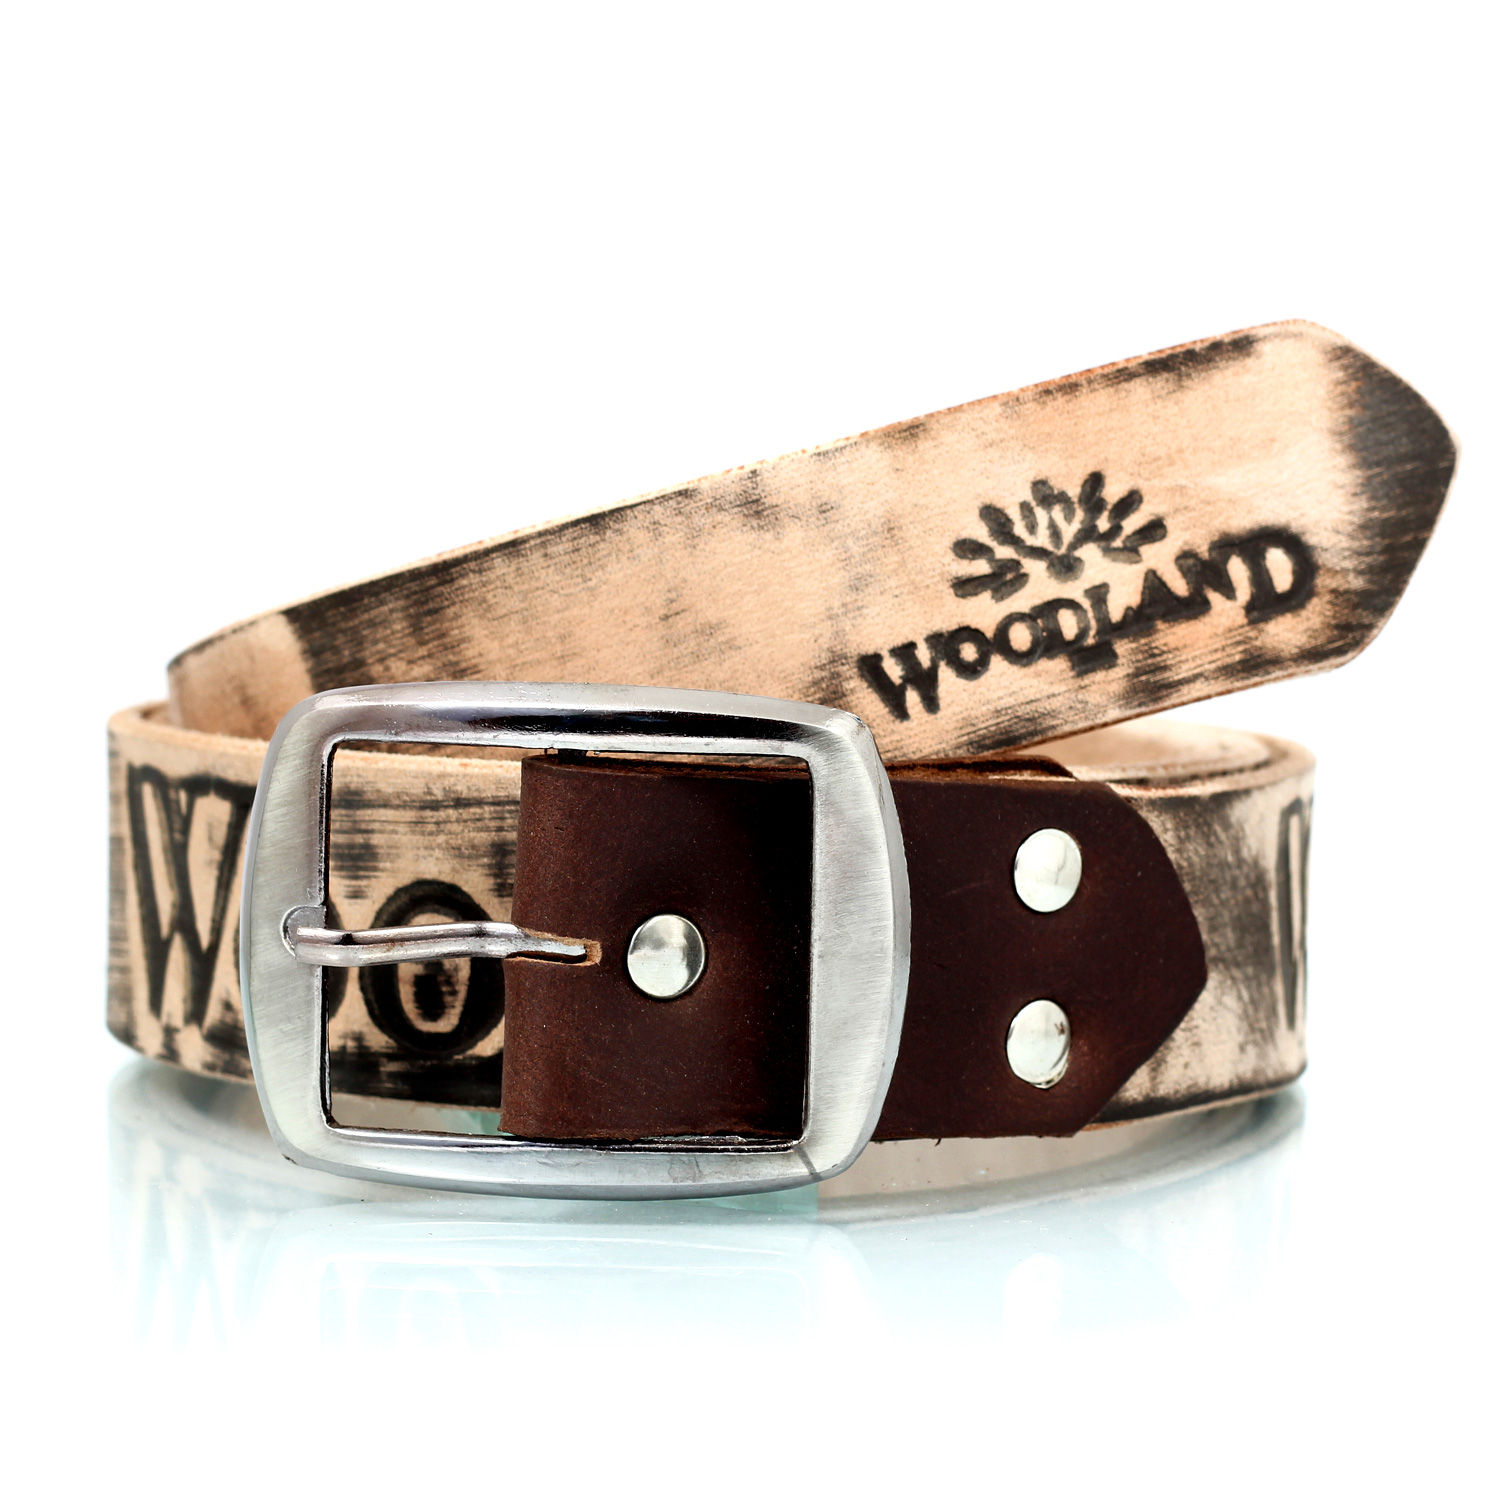 WOODLAND Printed Antique faded Design Leather Belt with round corner